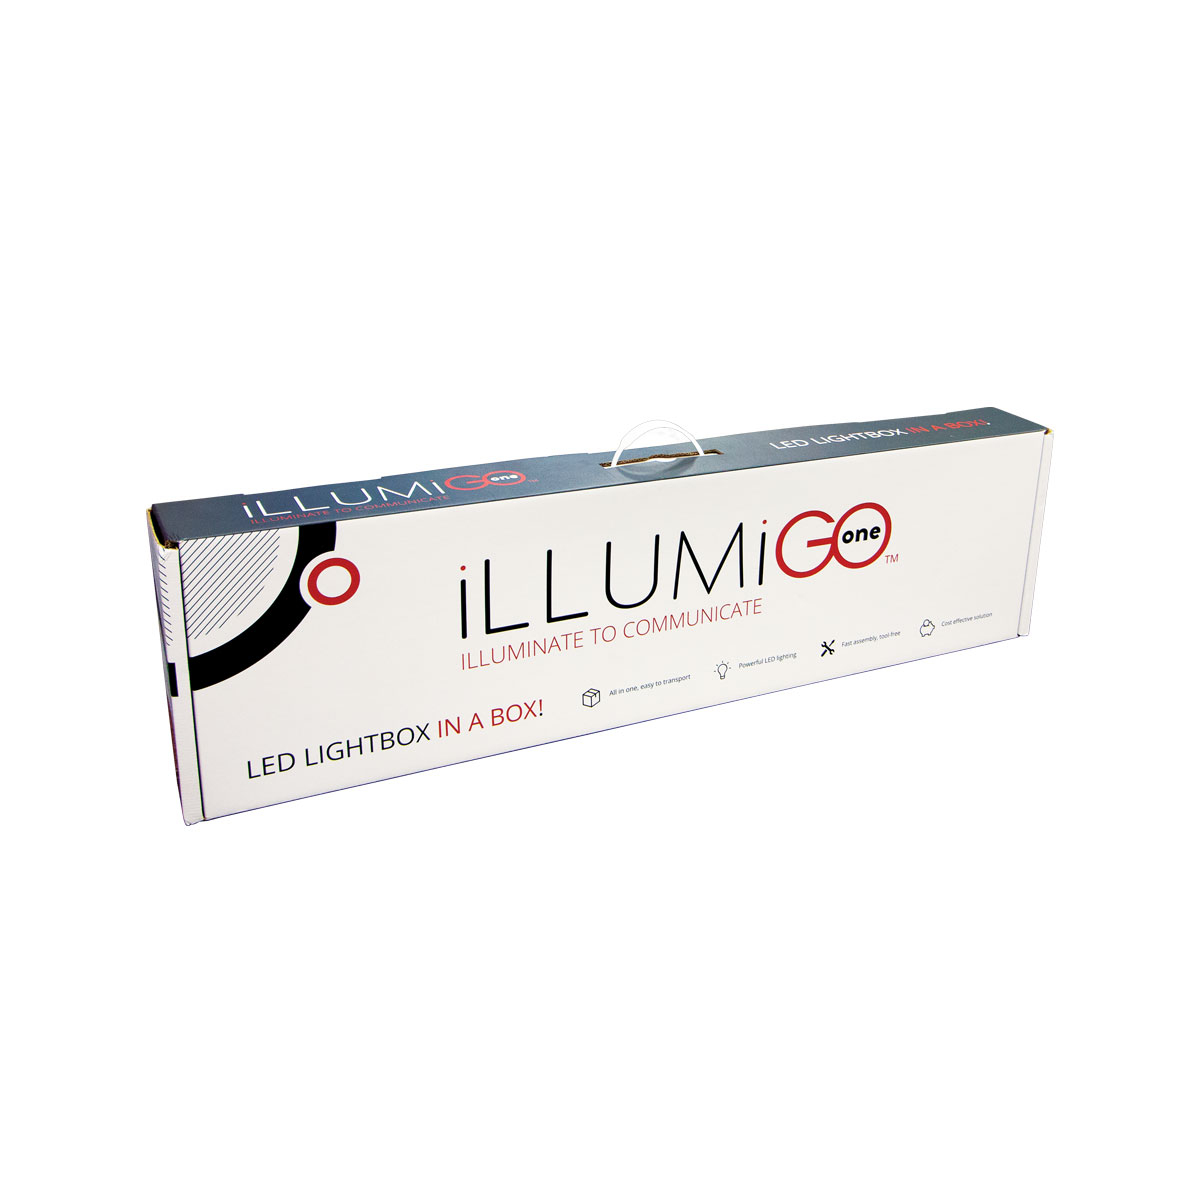 illumiGO ONE Backlit LED Lightbox is Complete With a Compact Carry Box With Foam Inserts For Easy Storage & Transport